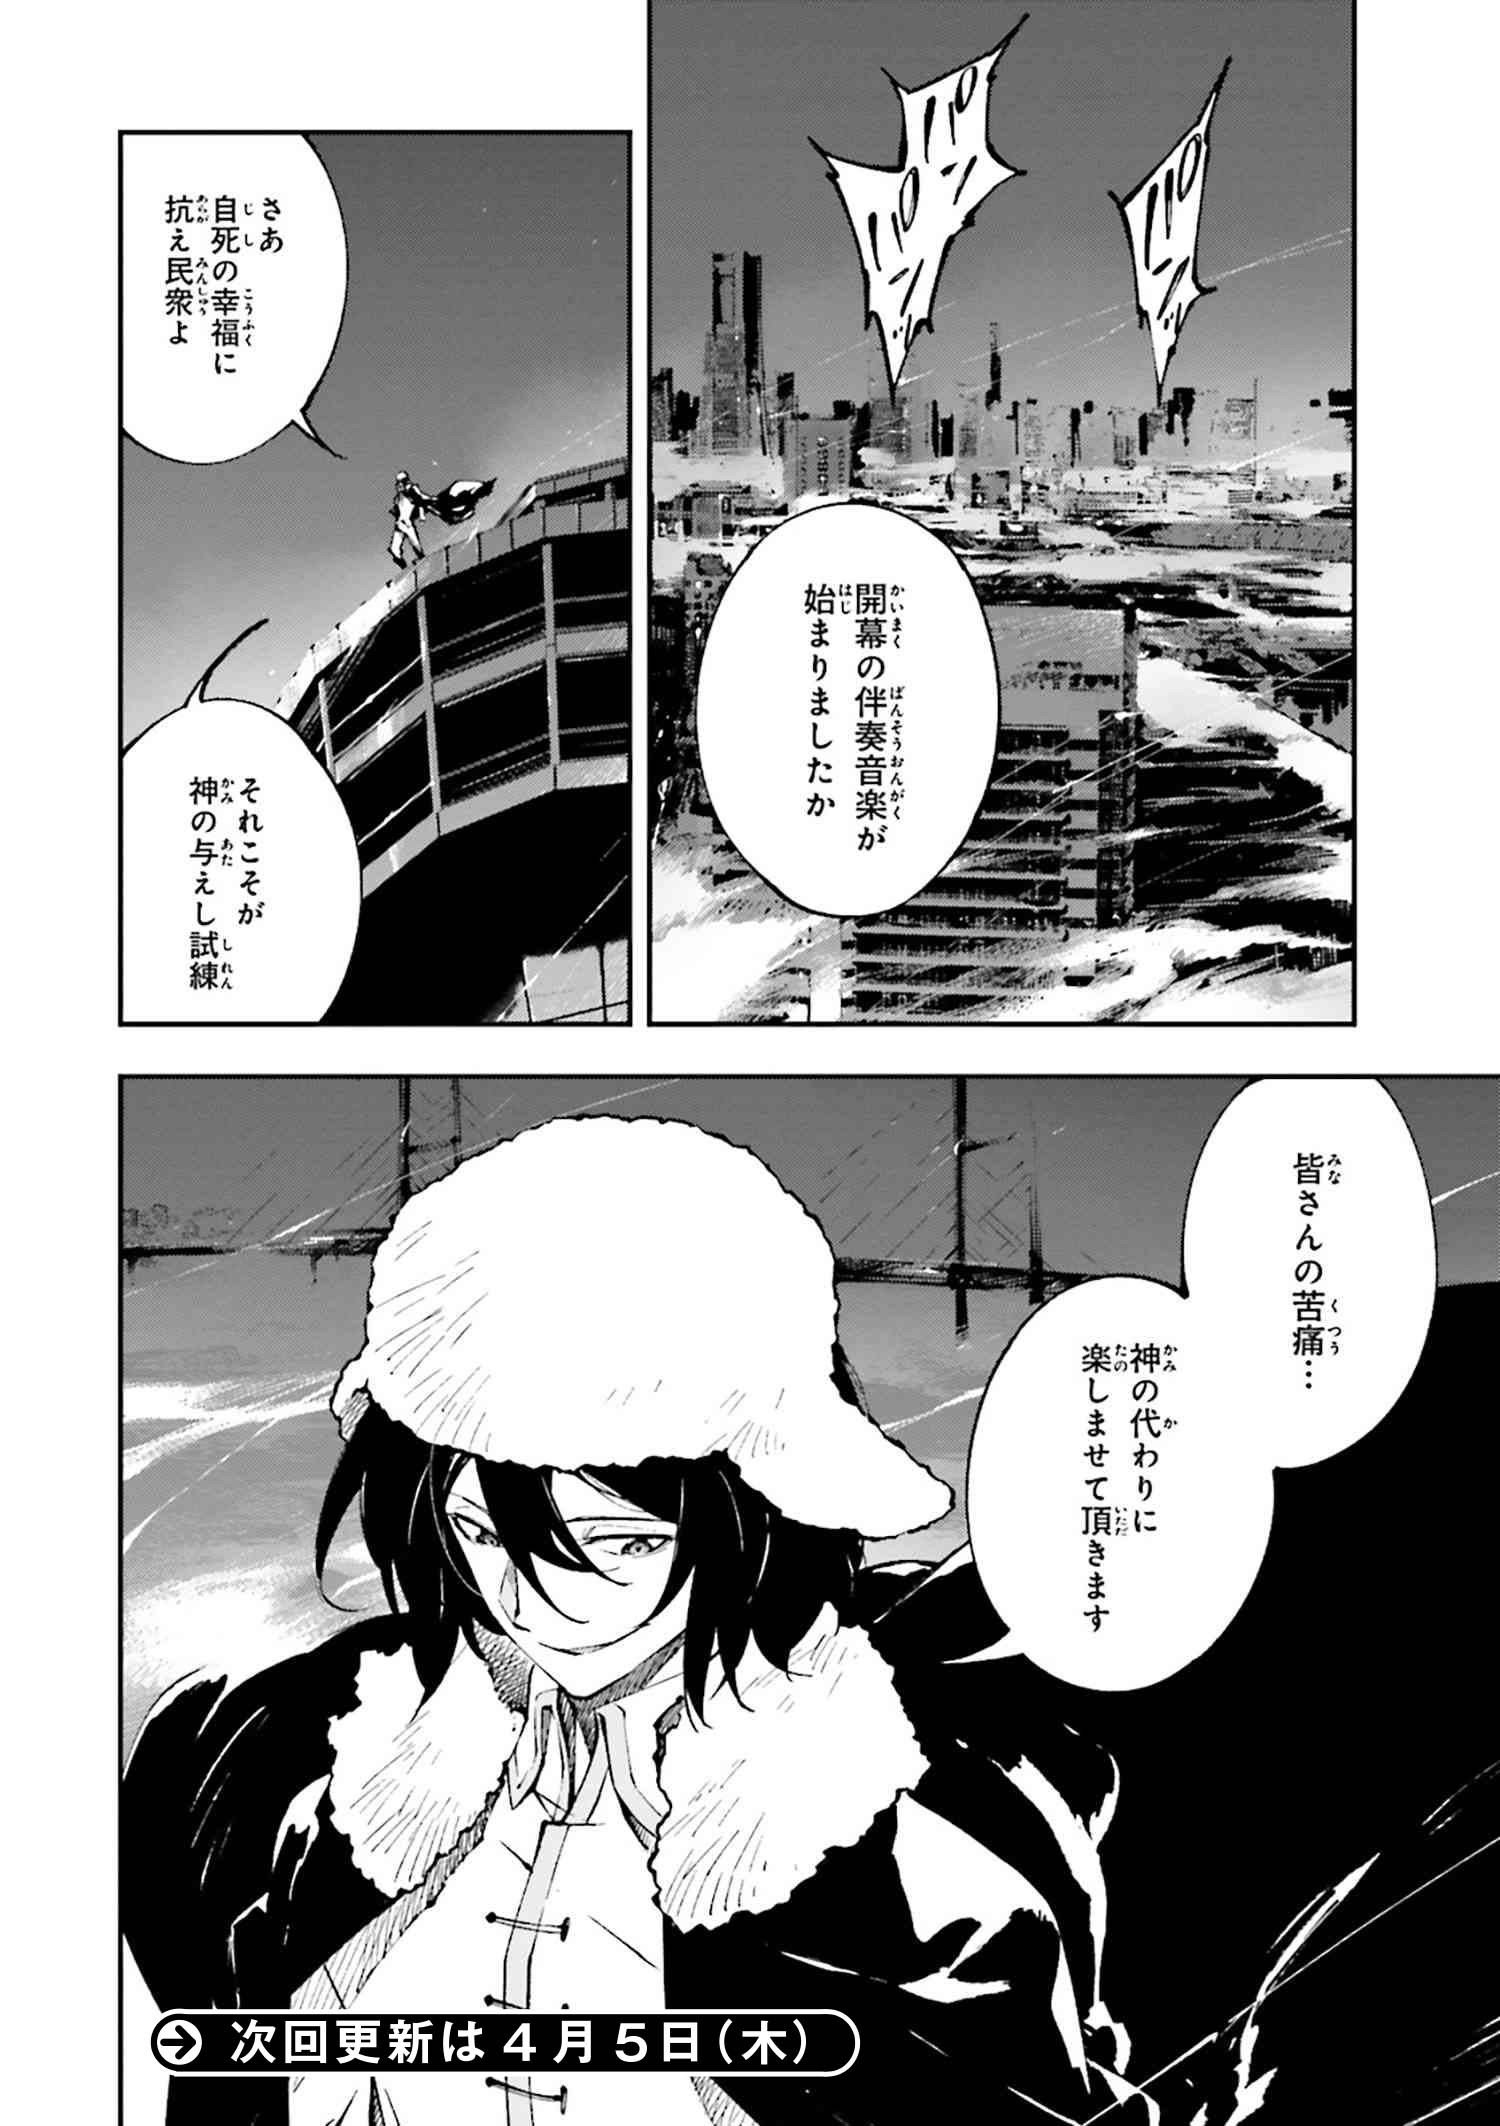 Bungou Stray Dogs: Dead Apple - Chapter 1-2 - Page 27